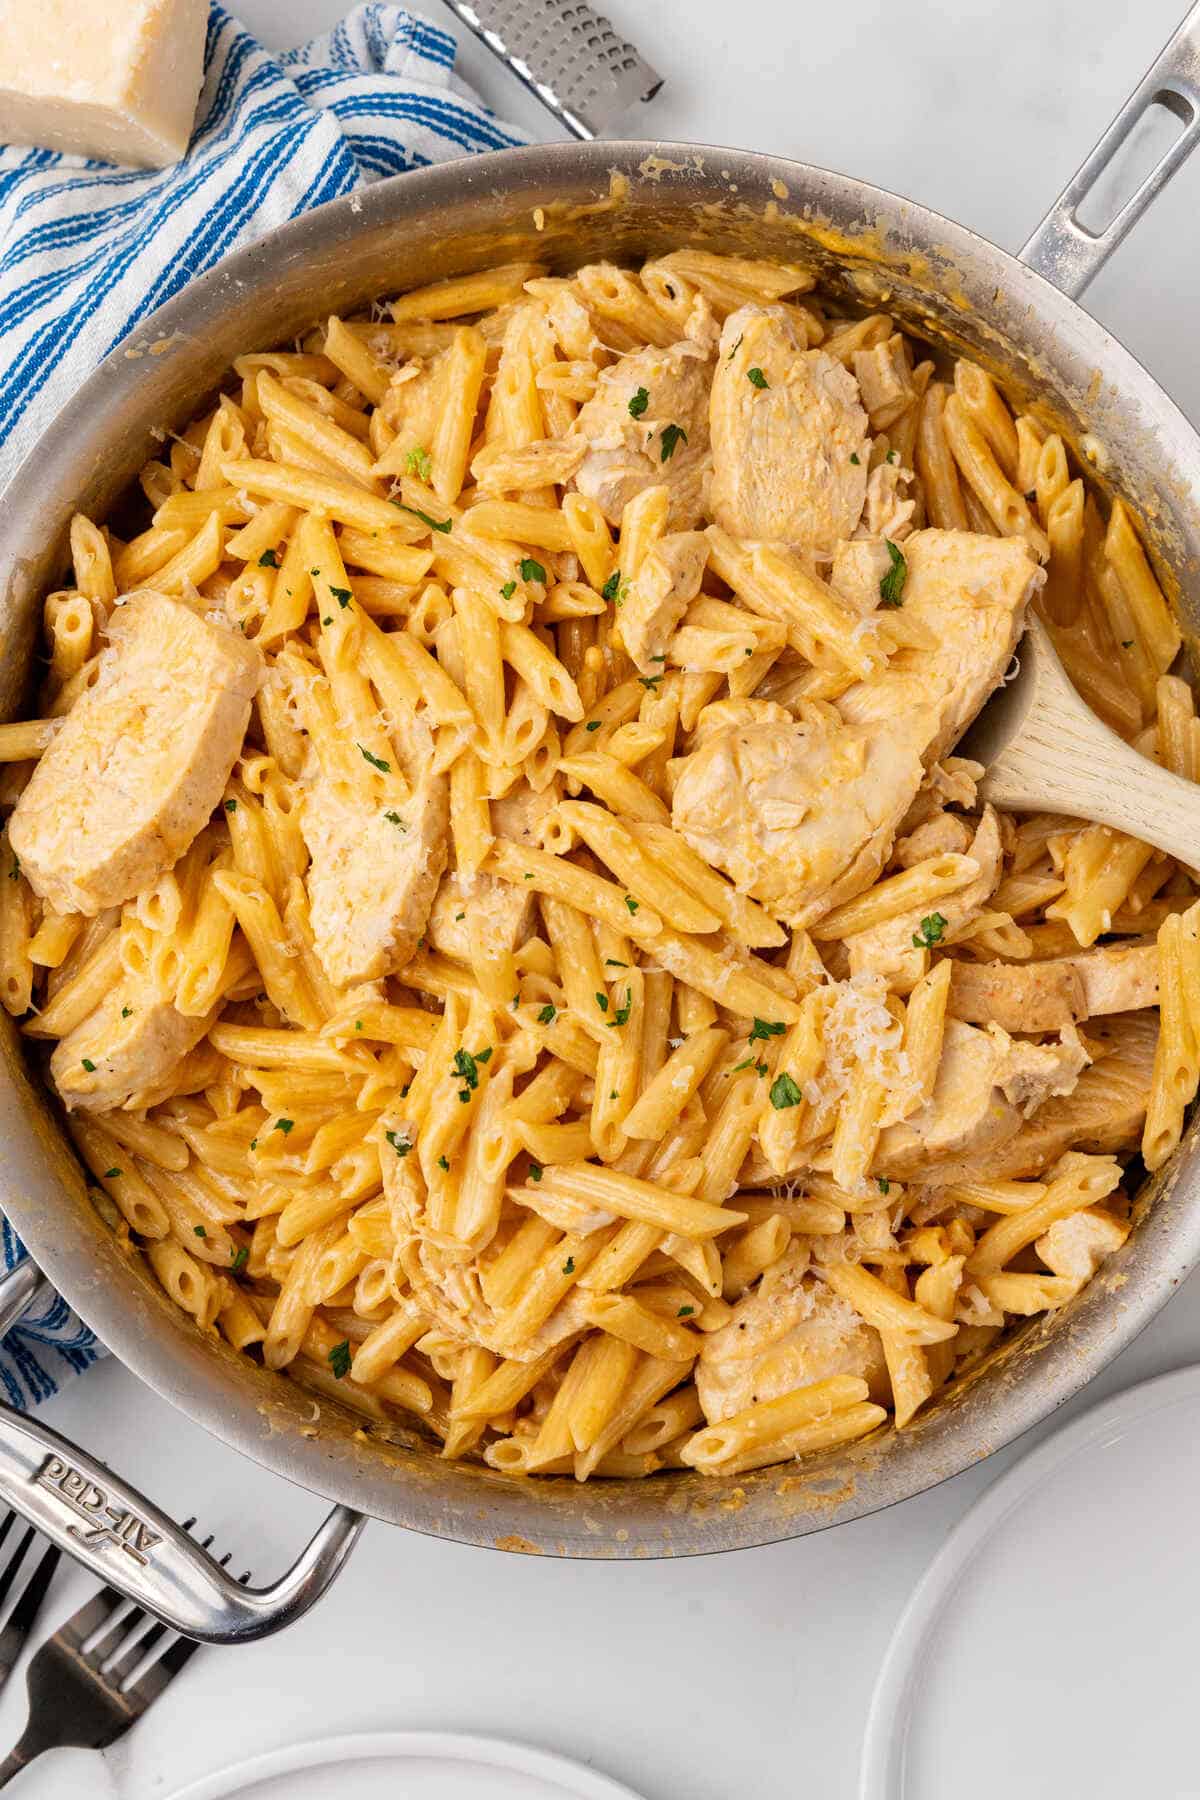 A skillet full of creamy buffalo chicken Alfredo pasta garnished with herbs.